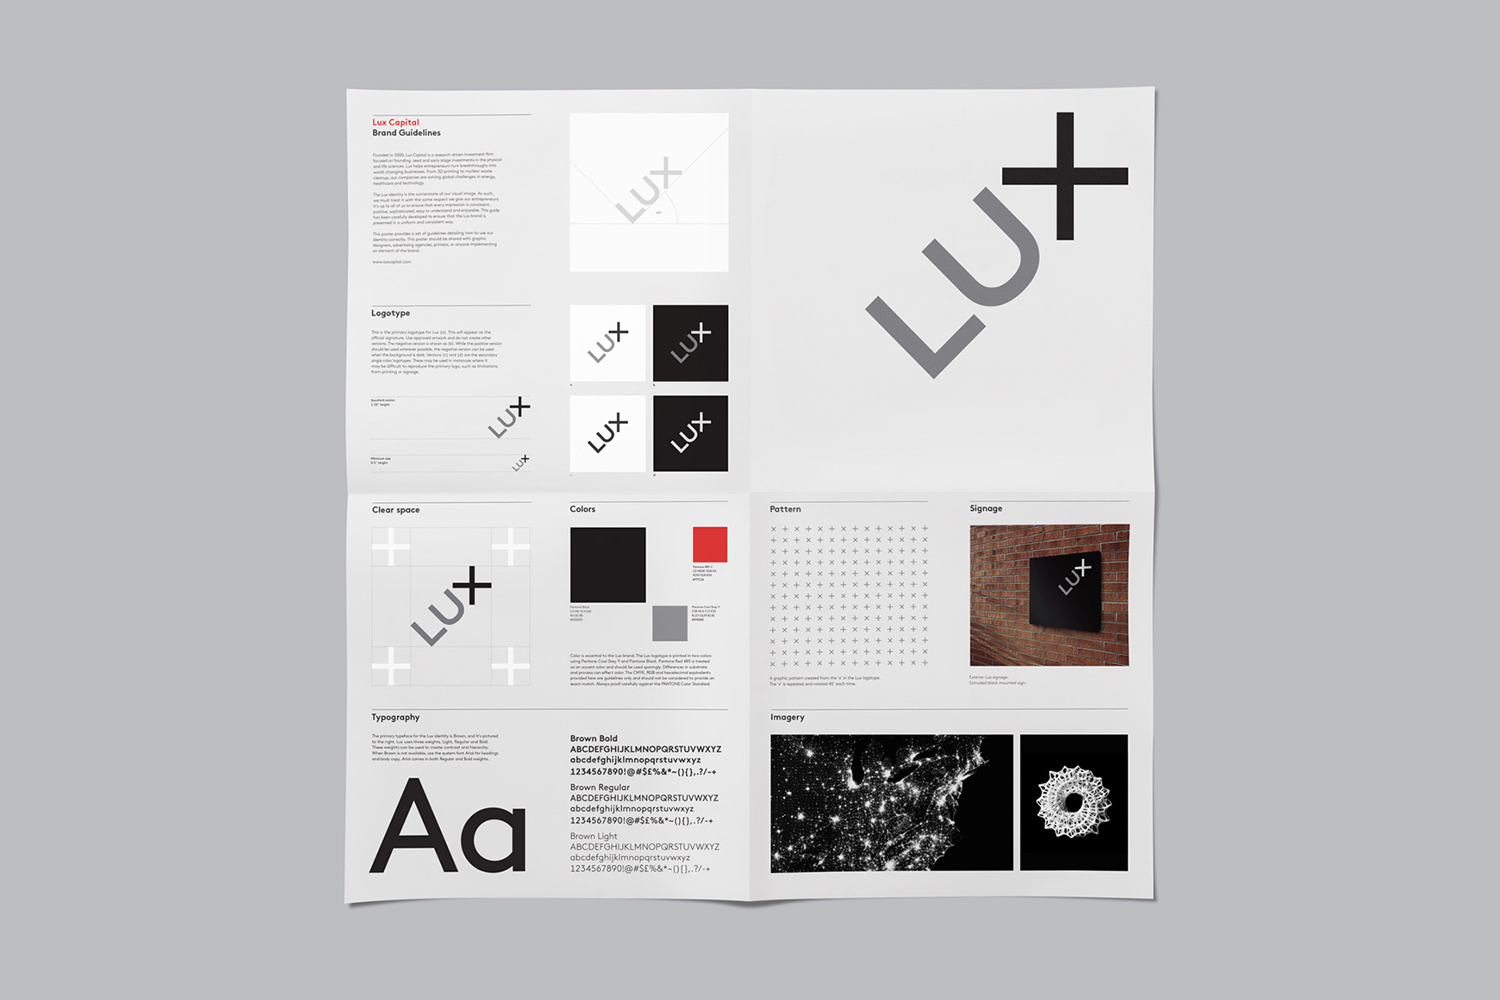 Brand identity guidelines for American venture capital firm Lux Capital by Mucho, United States